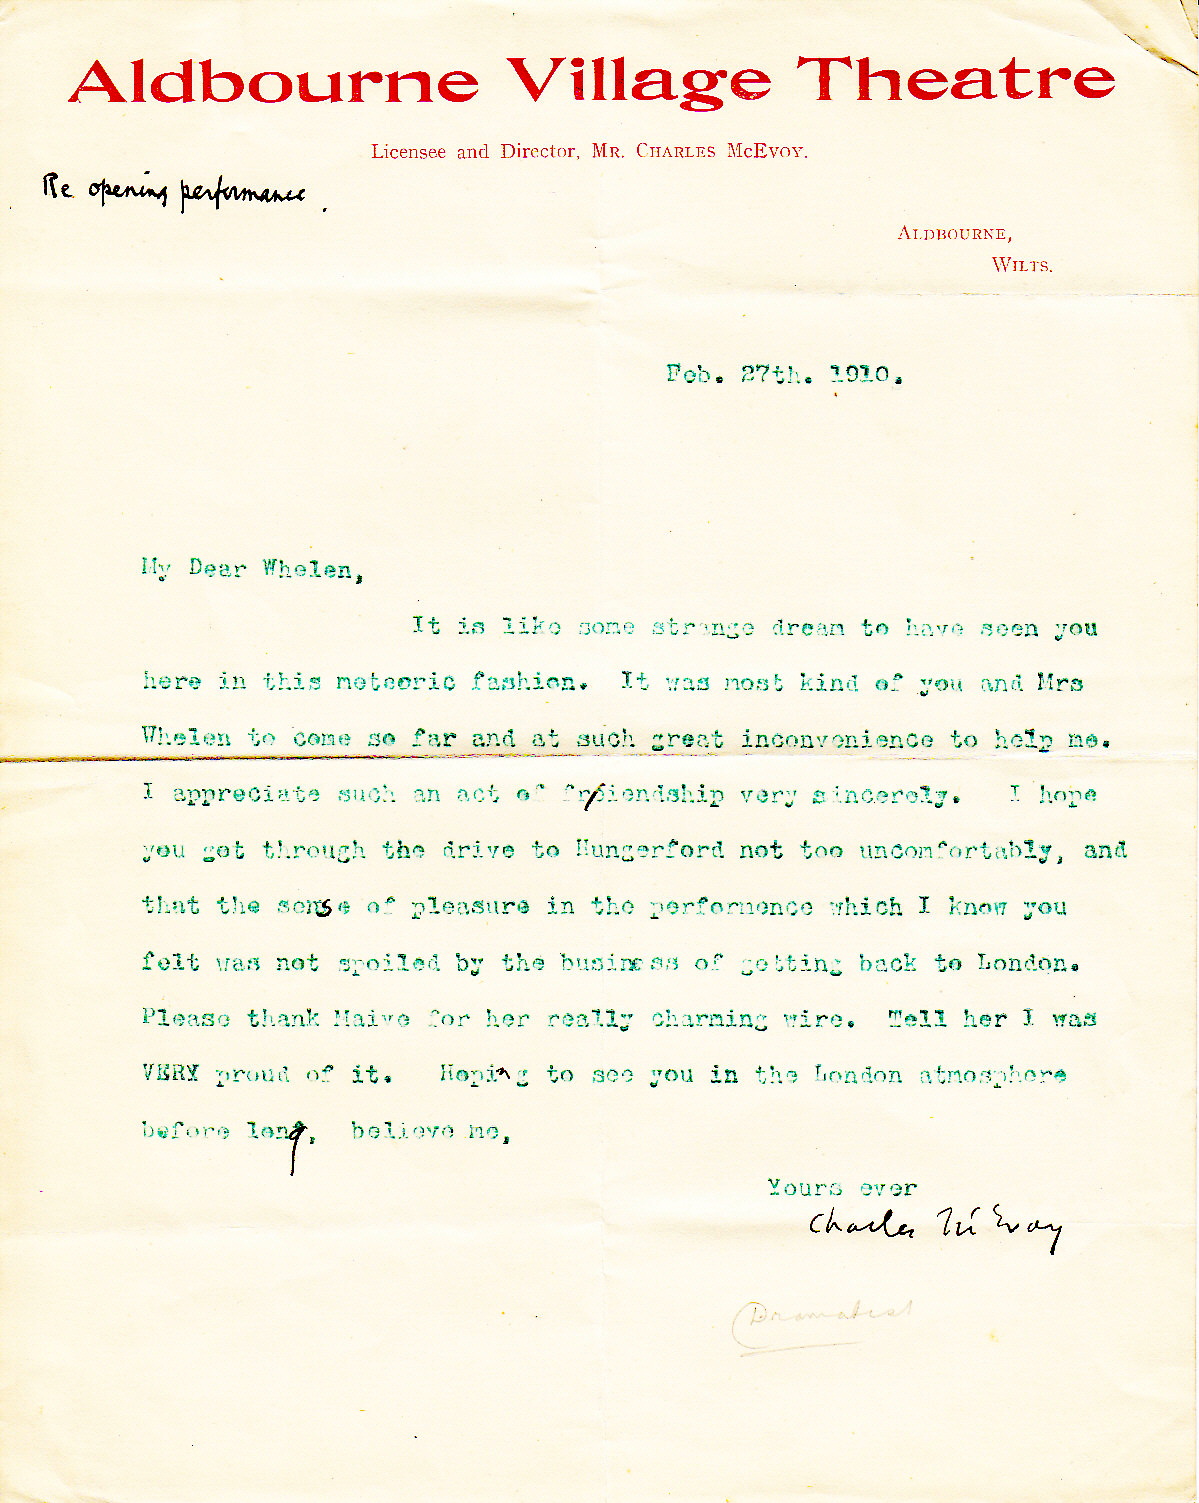 Recent Acquisition: Letters of Charles McEvoy